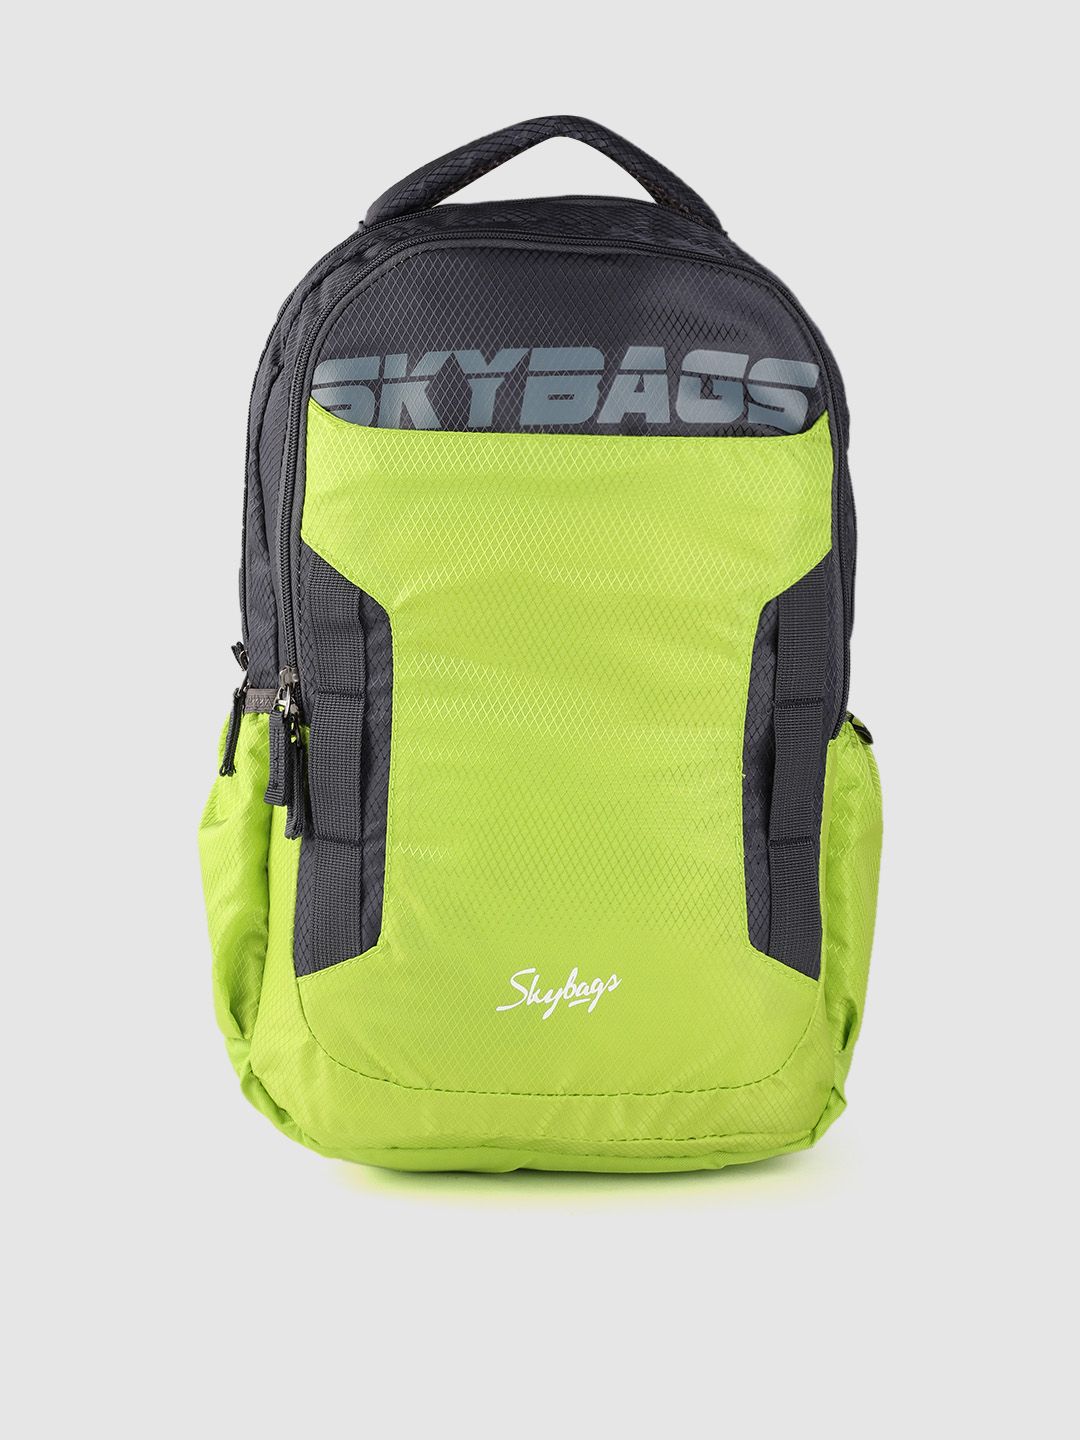 Skybags Unisex Green & Grey Colourblocked Backpack with Daisy Chains Price in India